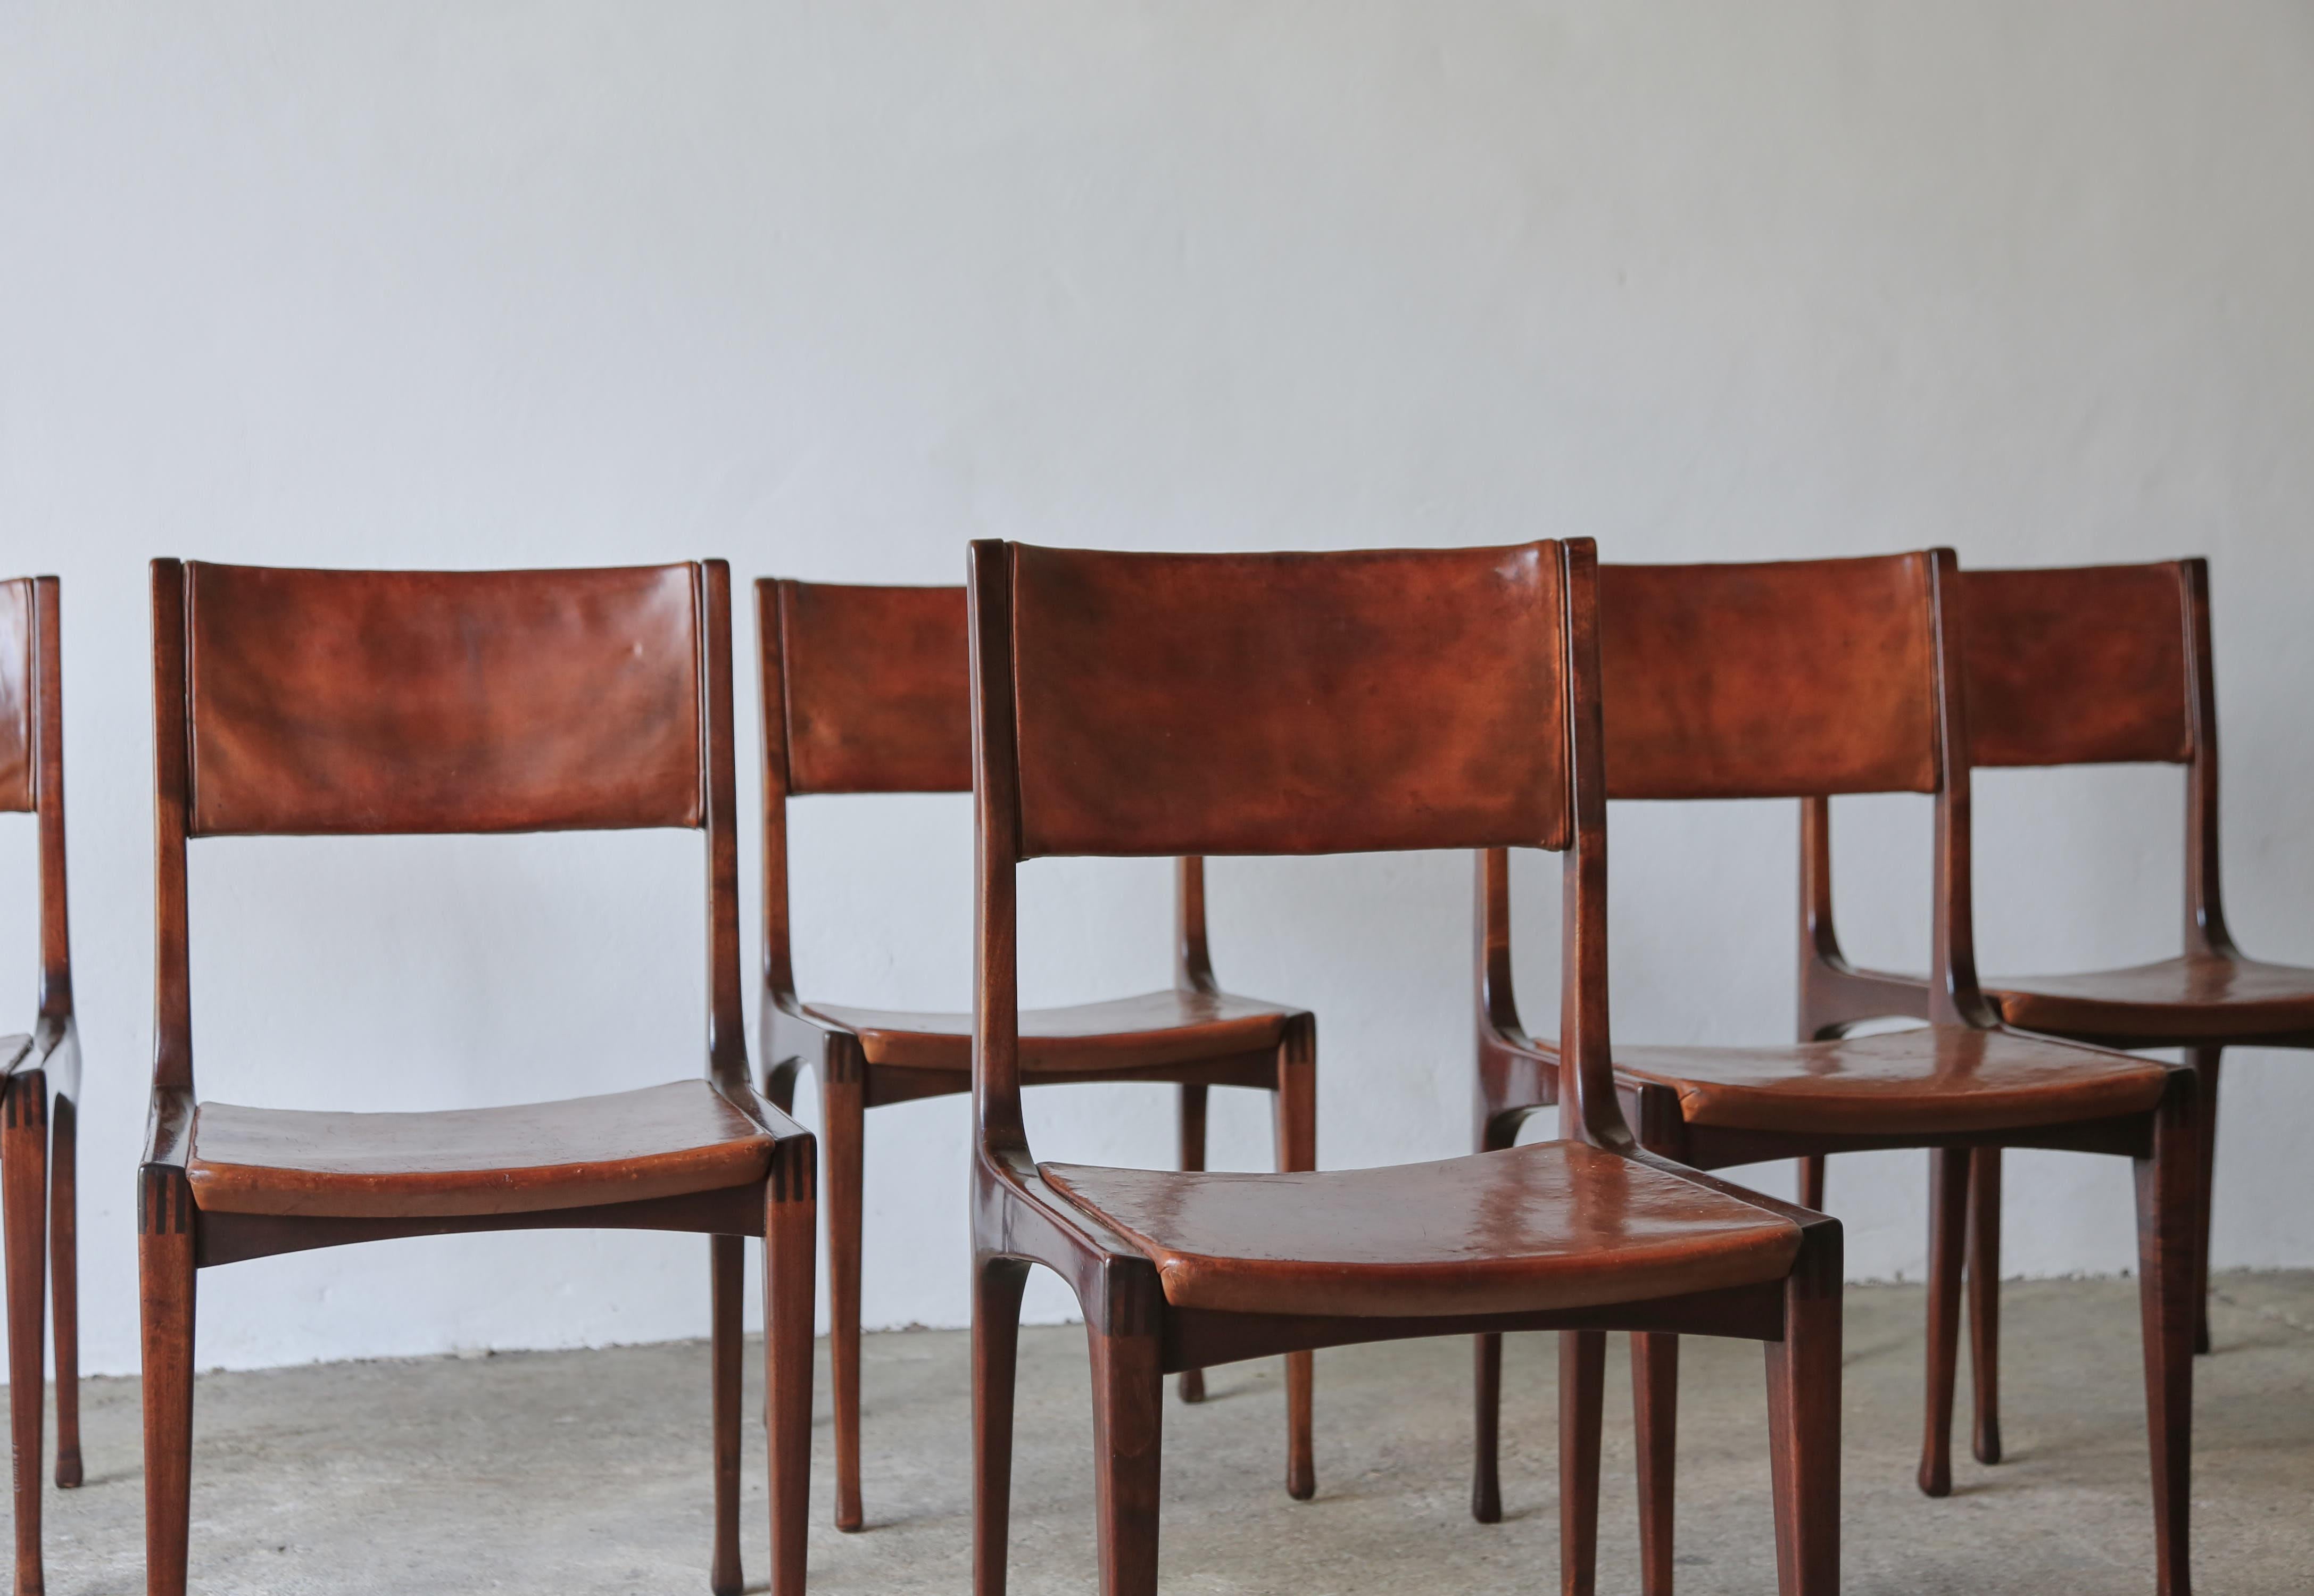 Set of 6 Model 693 Chairs by Carlo de Carli for Cassina, Italy, 1950s For Sale 2